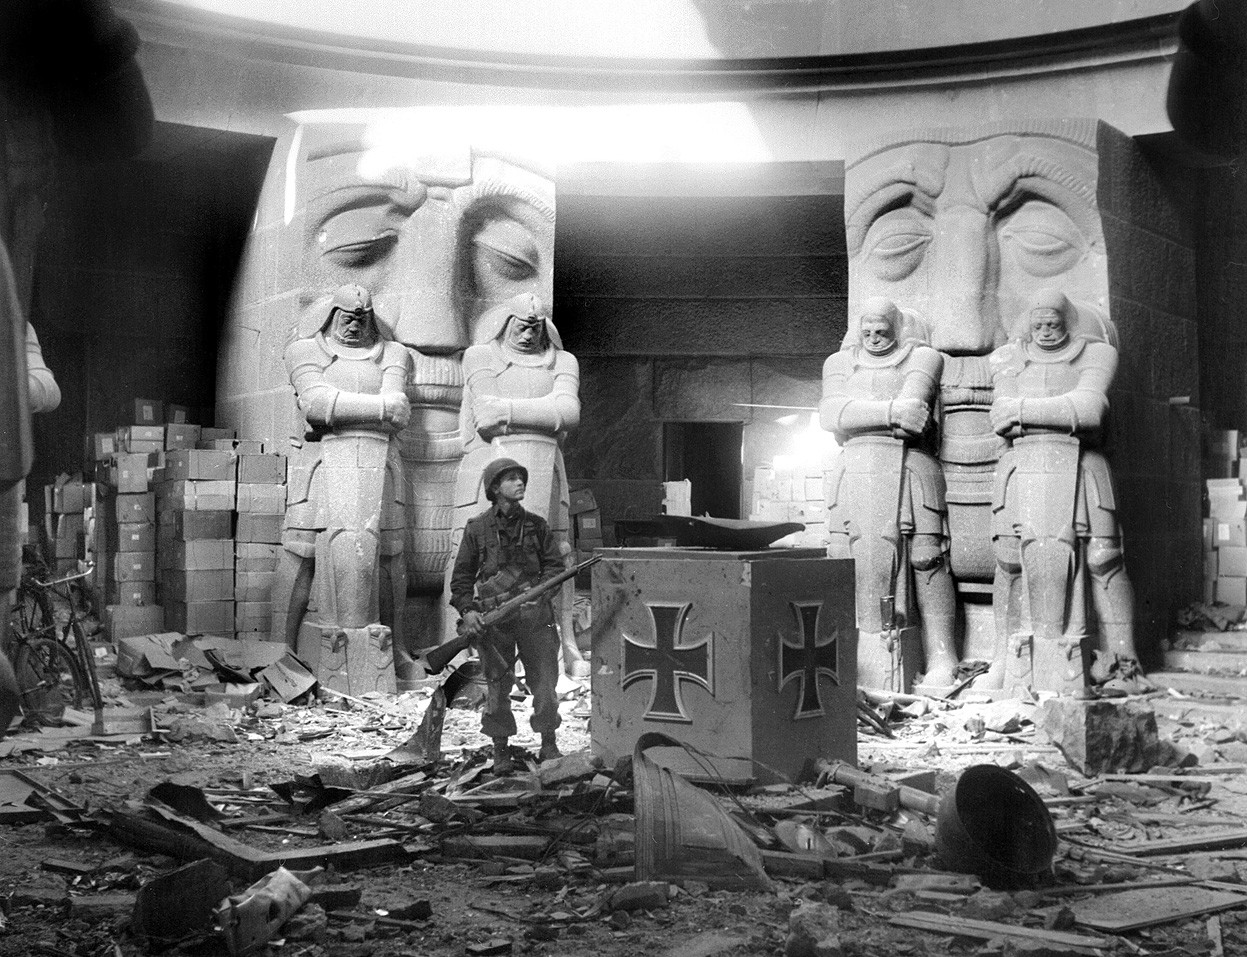 American soldier standing in the rubble of The Monument to the Battle of the Nations near Leipzig Germany, 1945